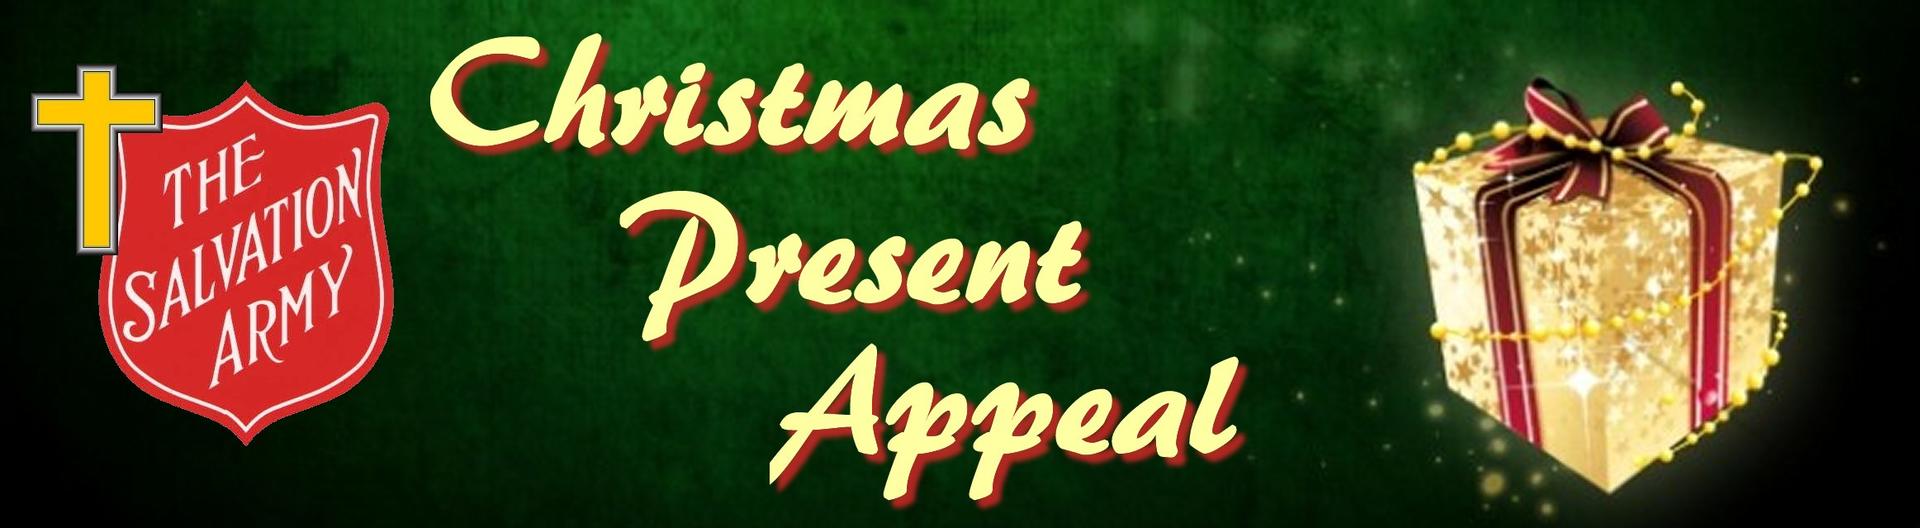 Christmas Present Appeal